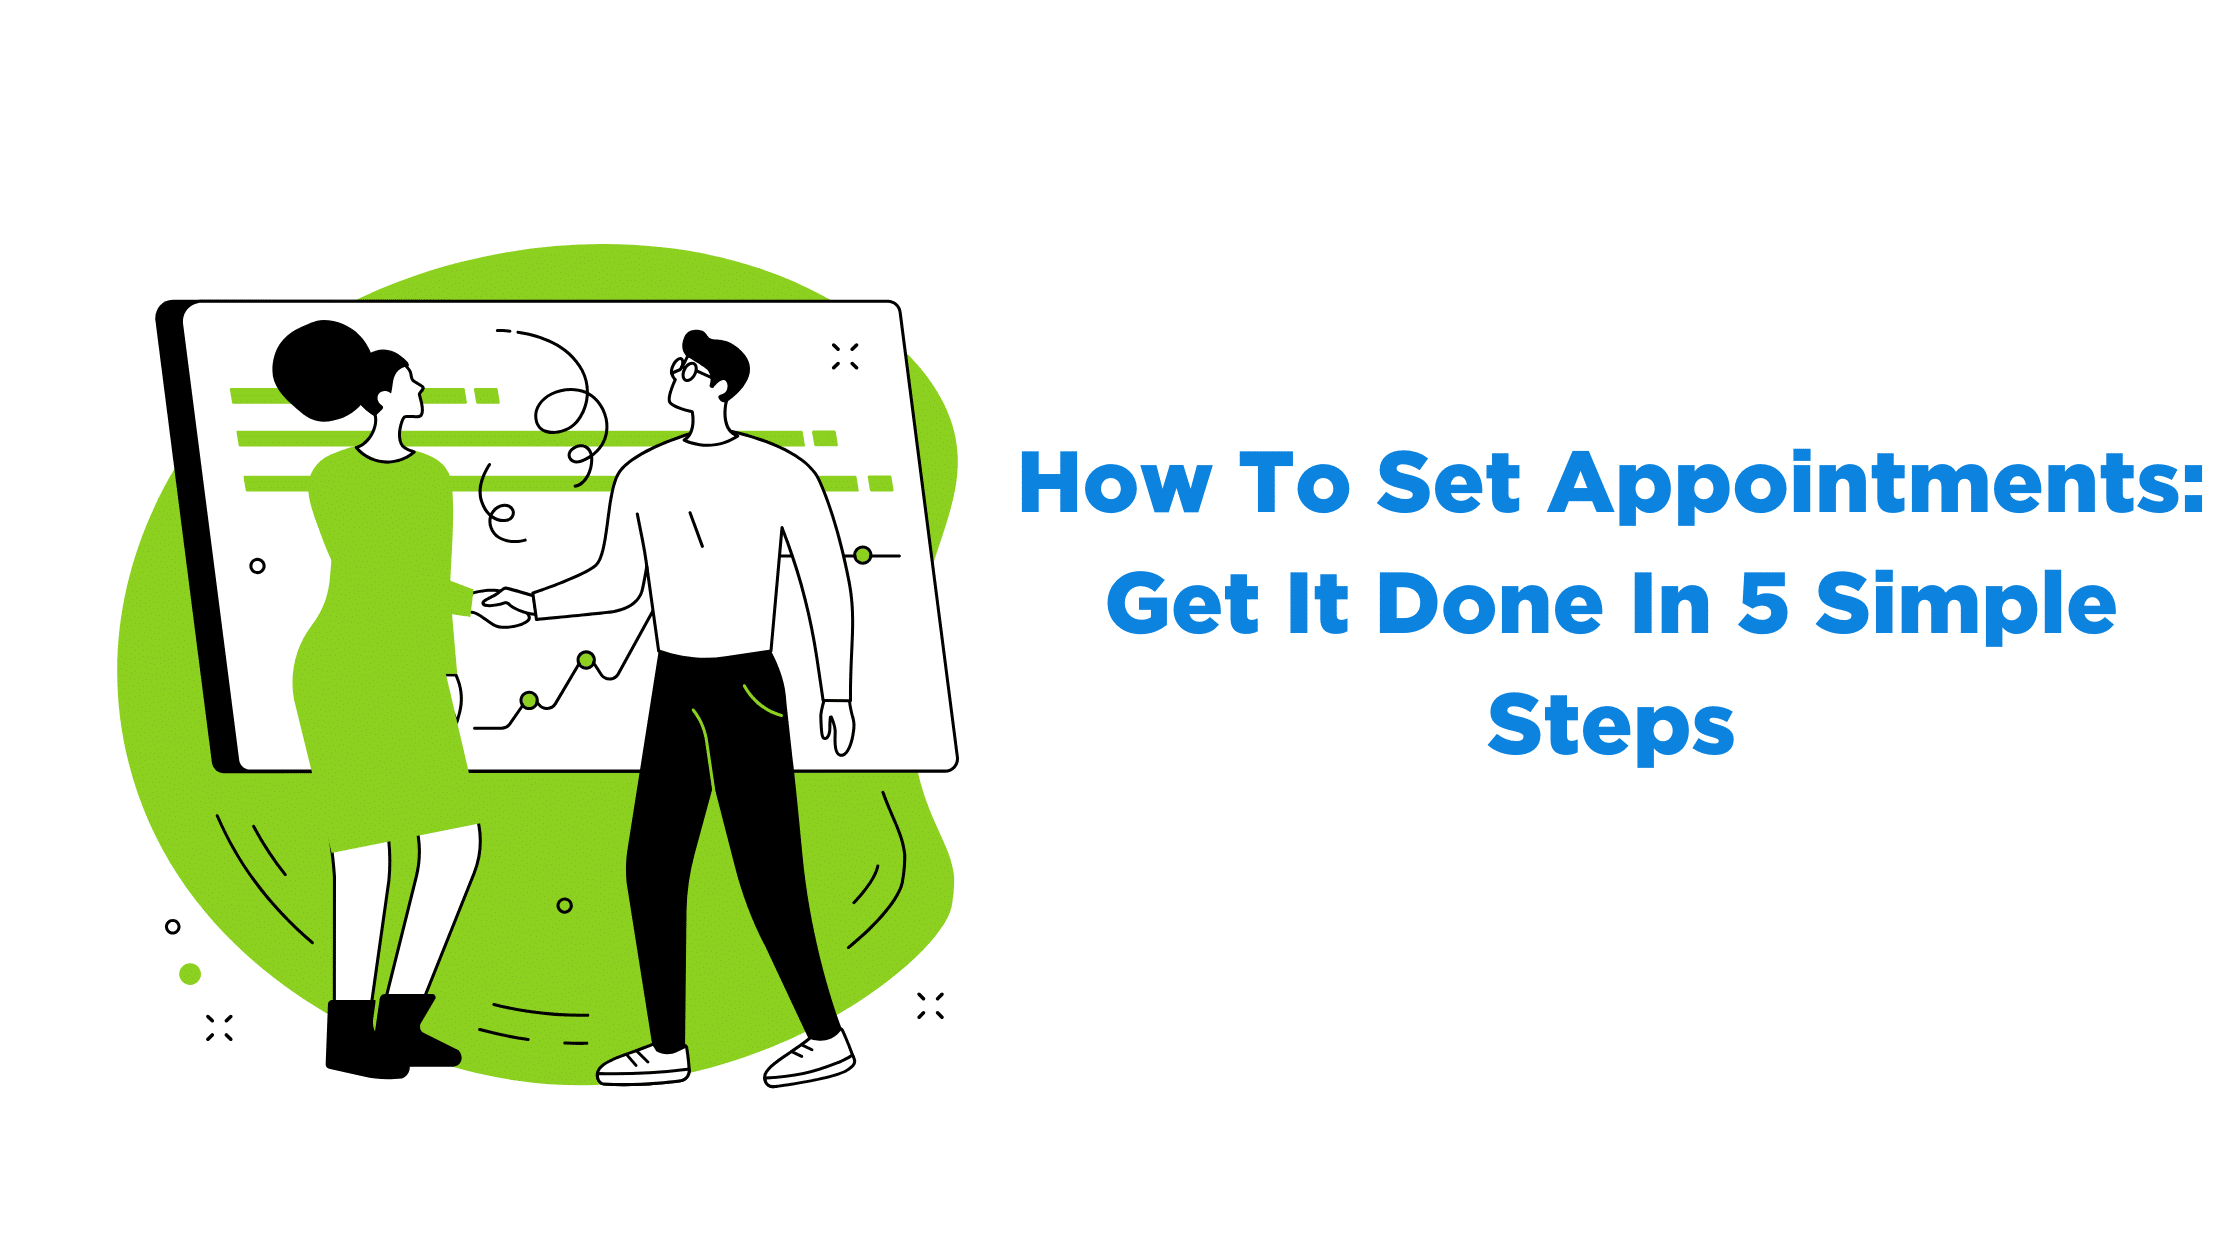 How To Set Appointments: Get It Done In 5 Simple Steps